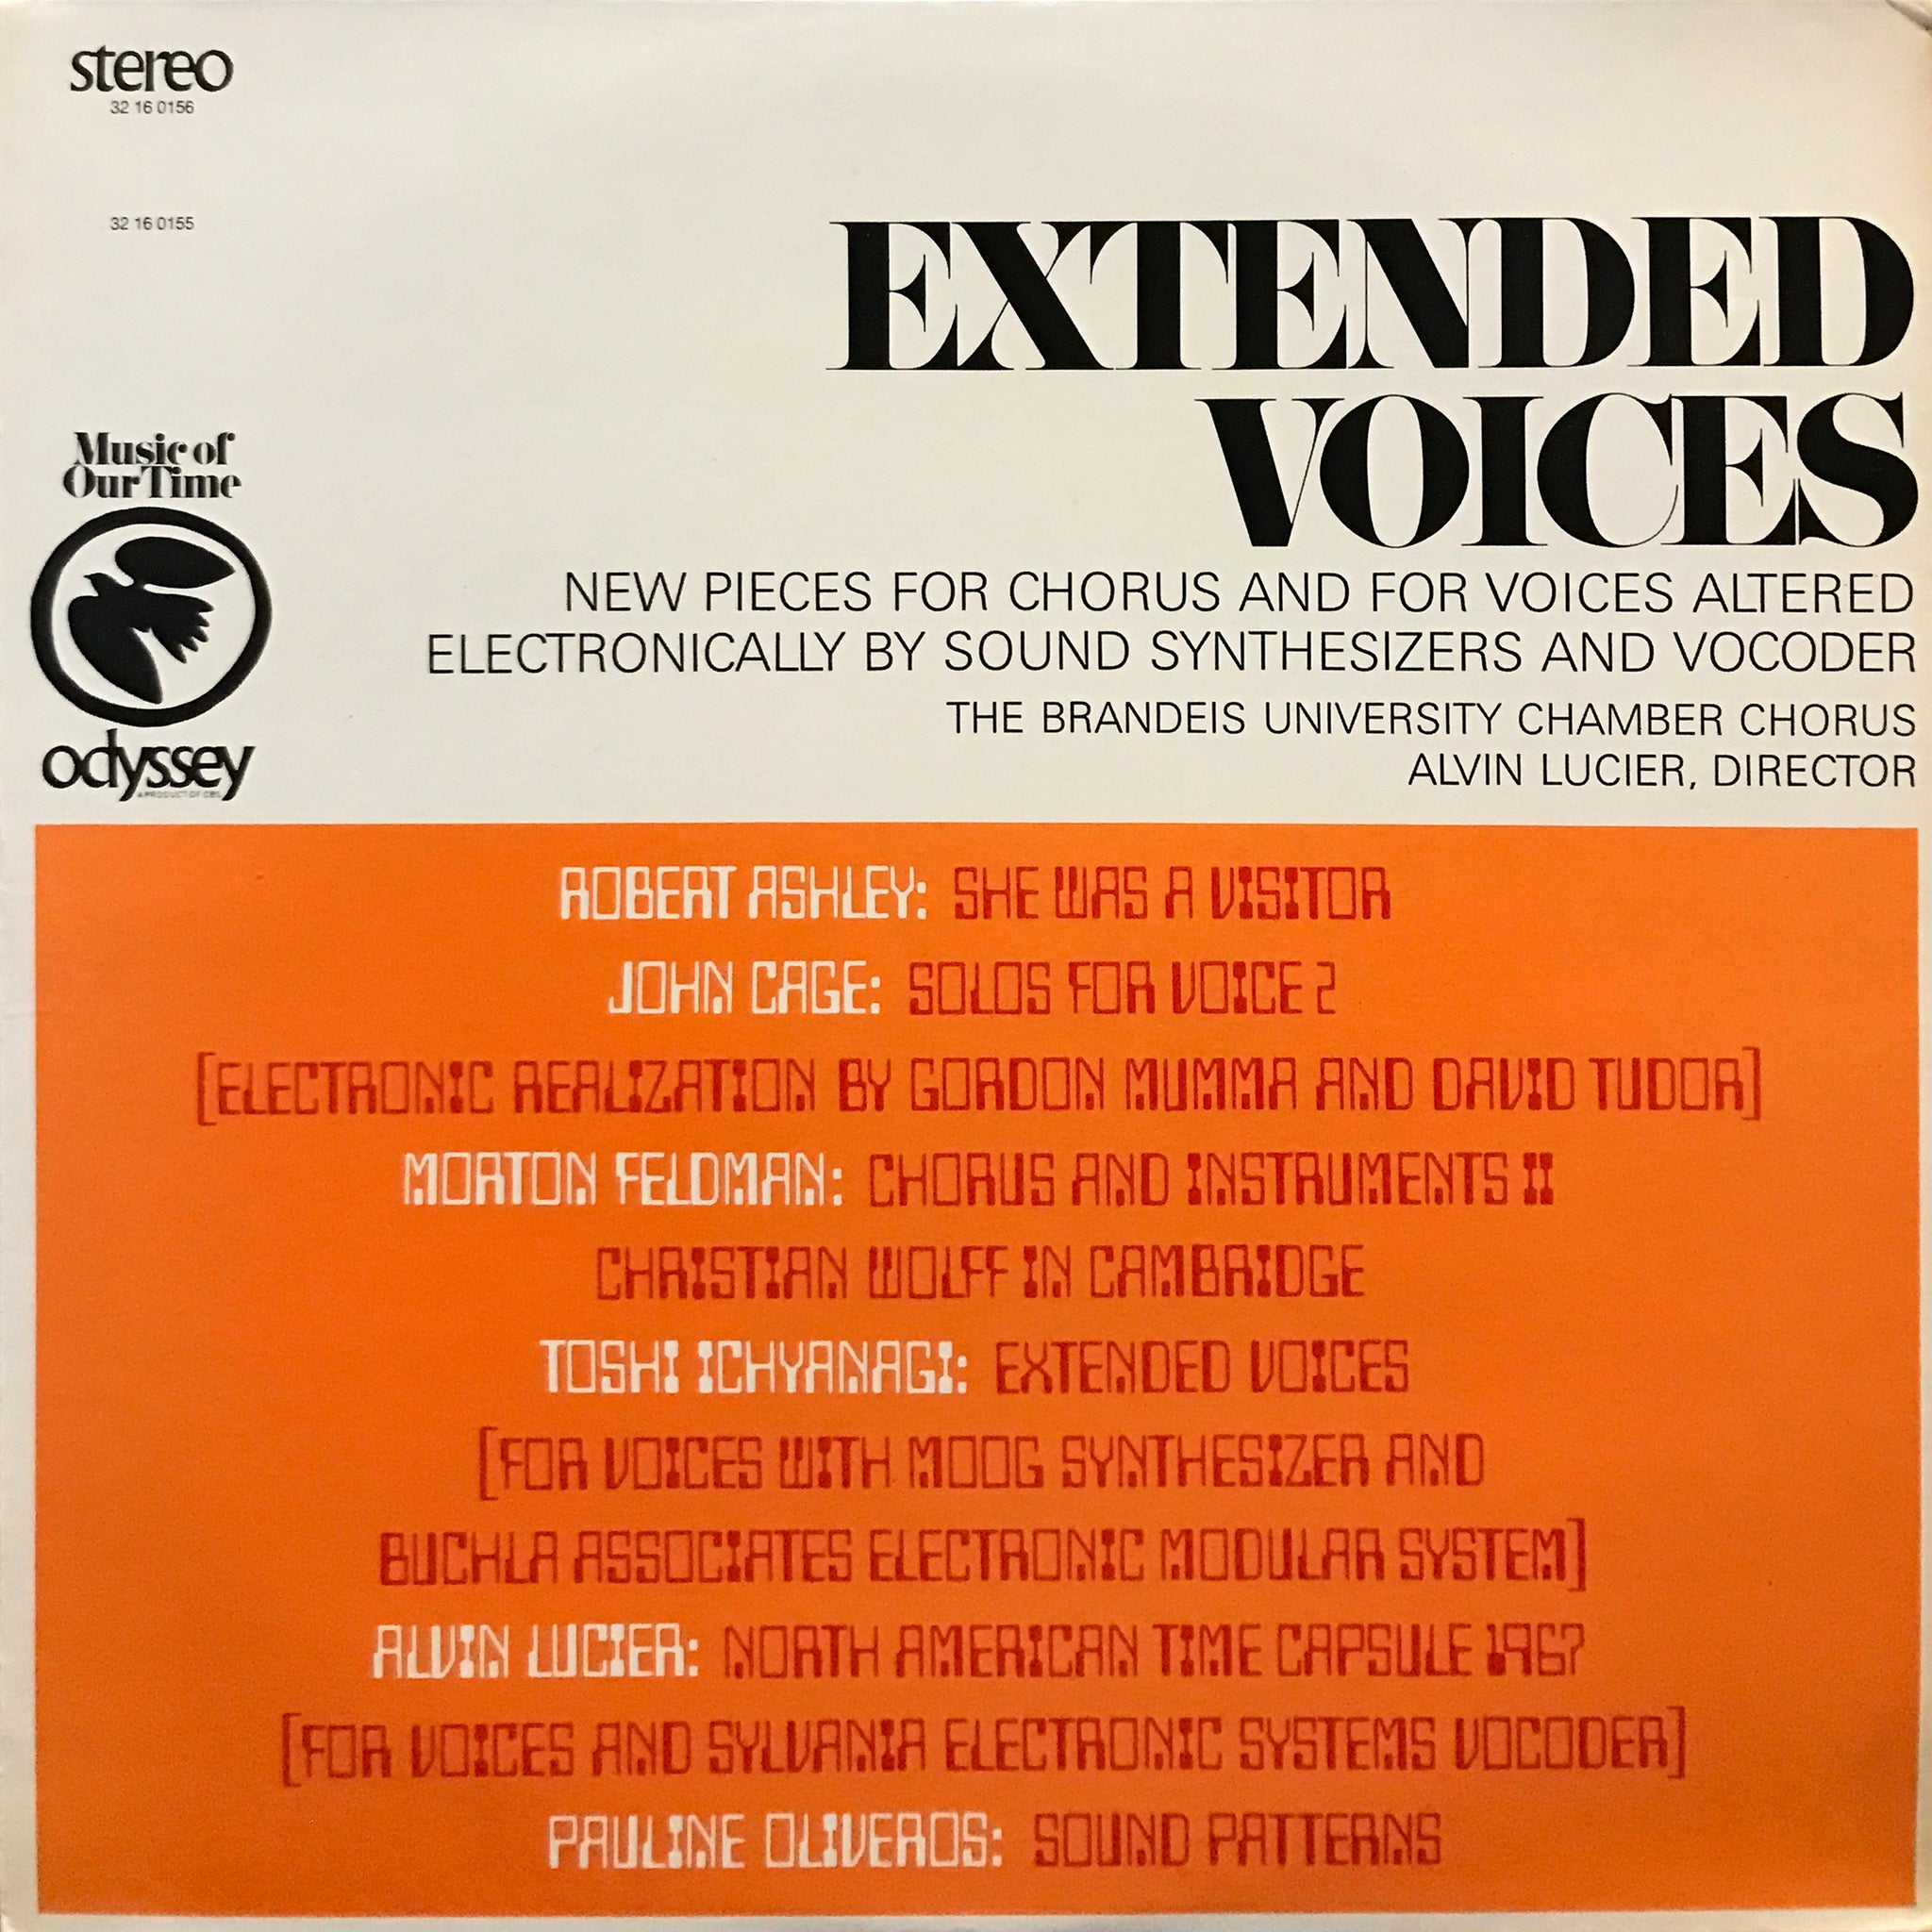 V.A. “Extended Voices” – PHYSICAL STORE